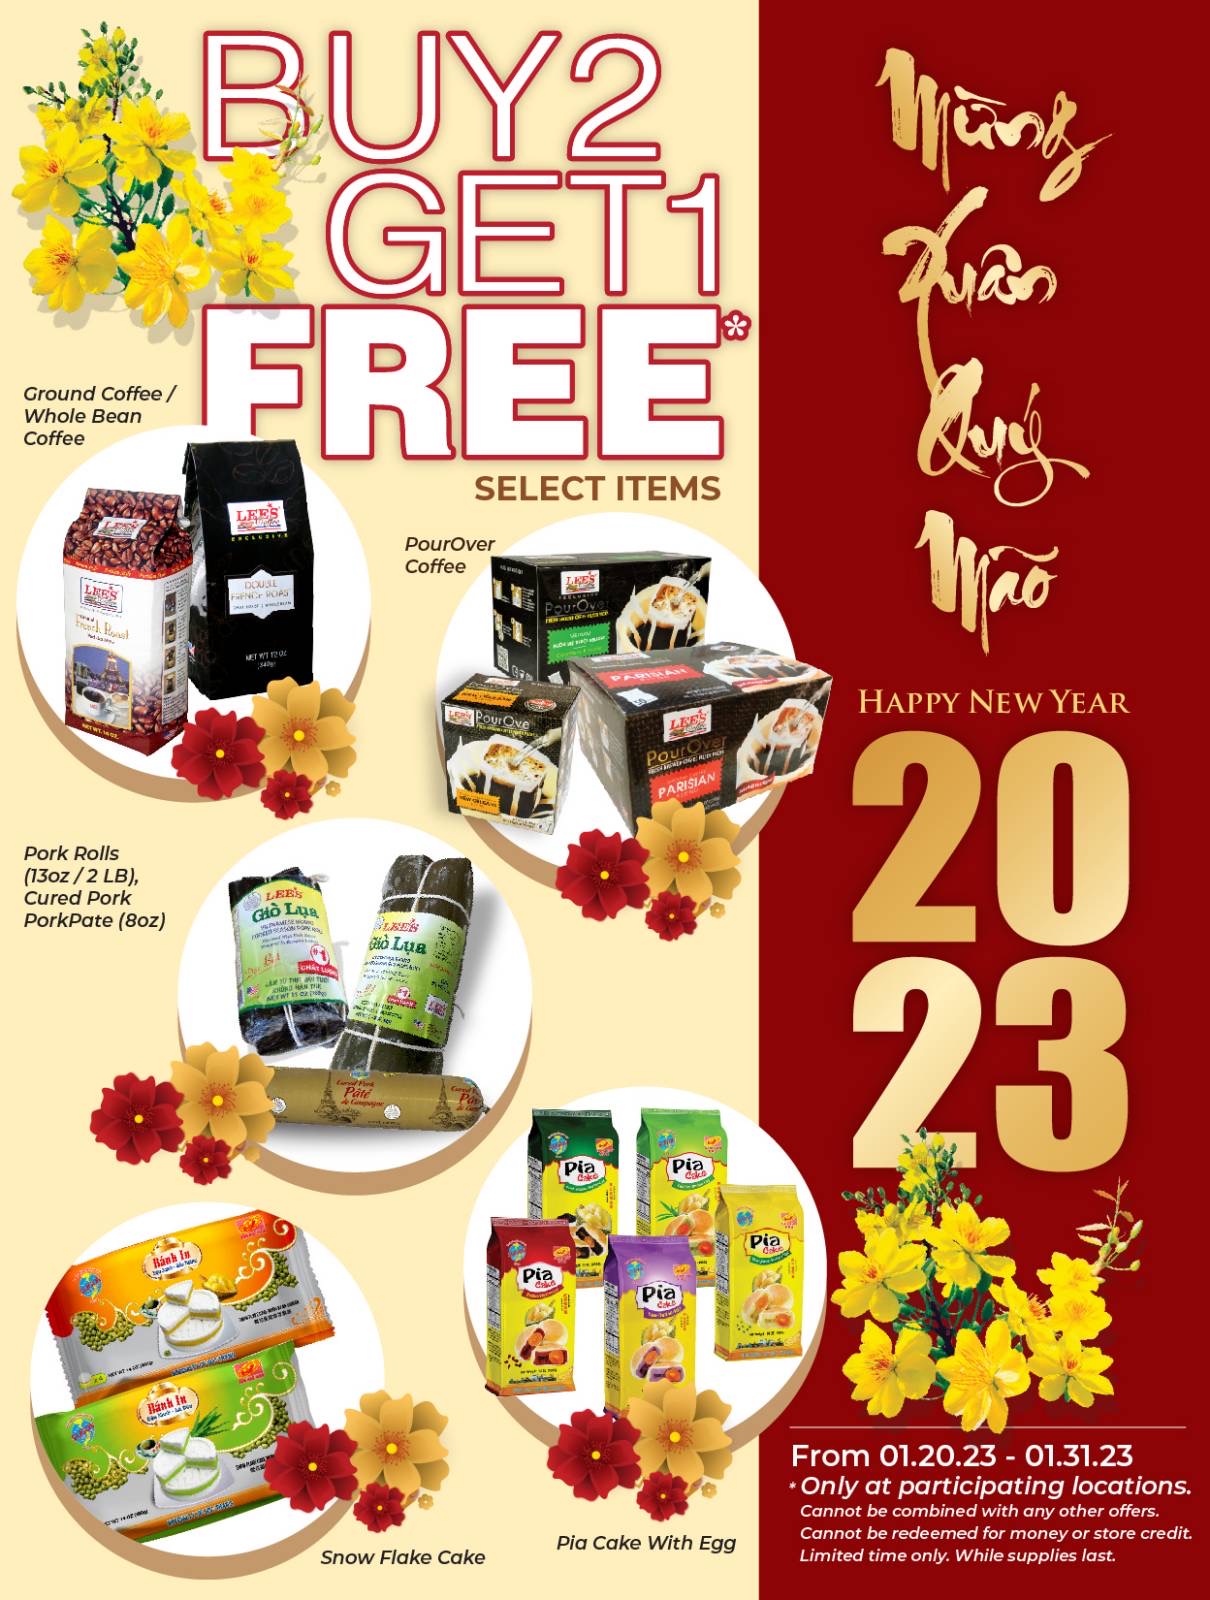 Start a joyful Lunar New Year with our Buy 2 Get 1 Promotion